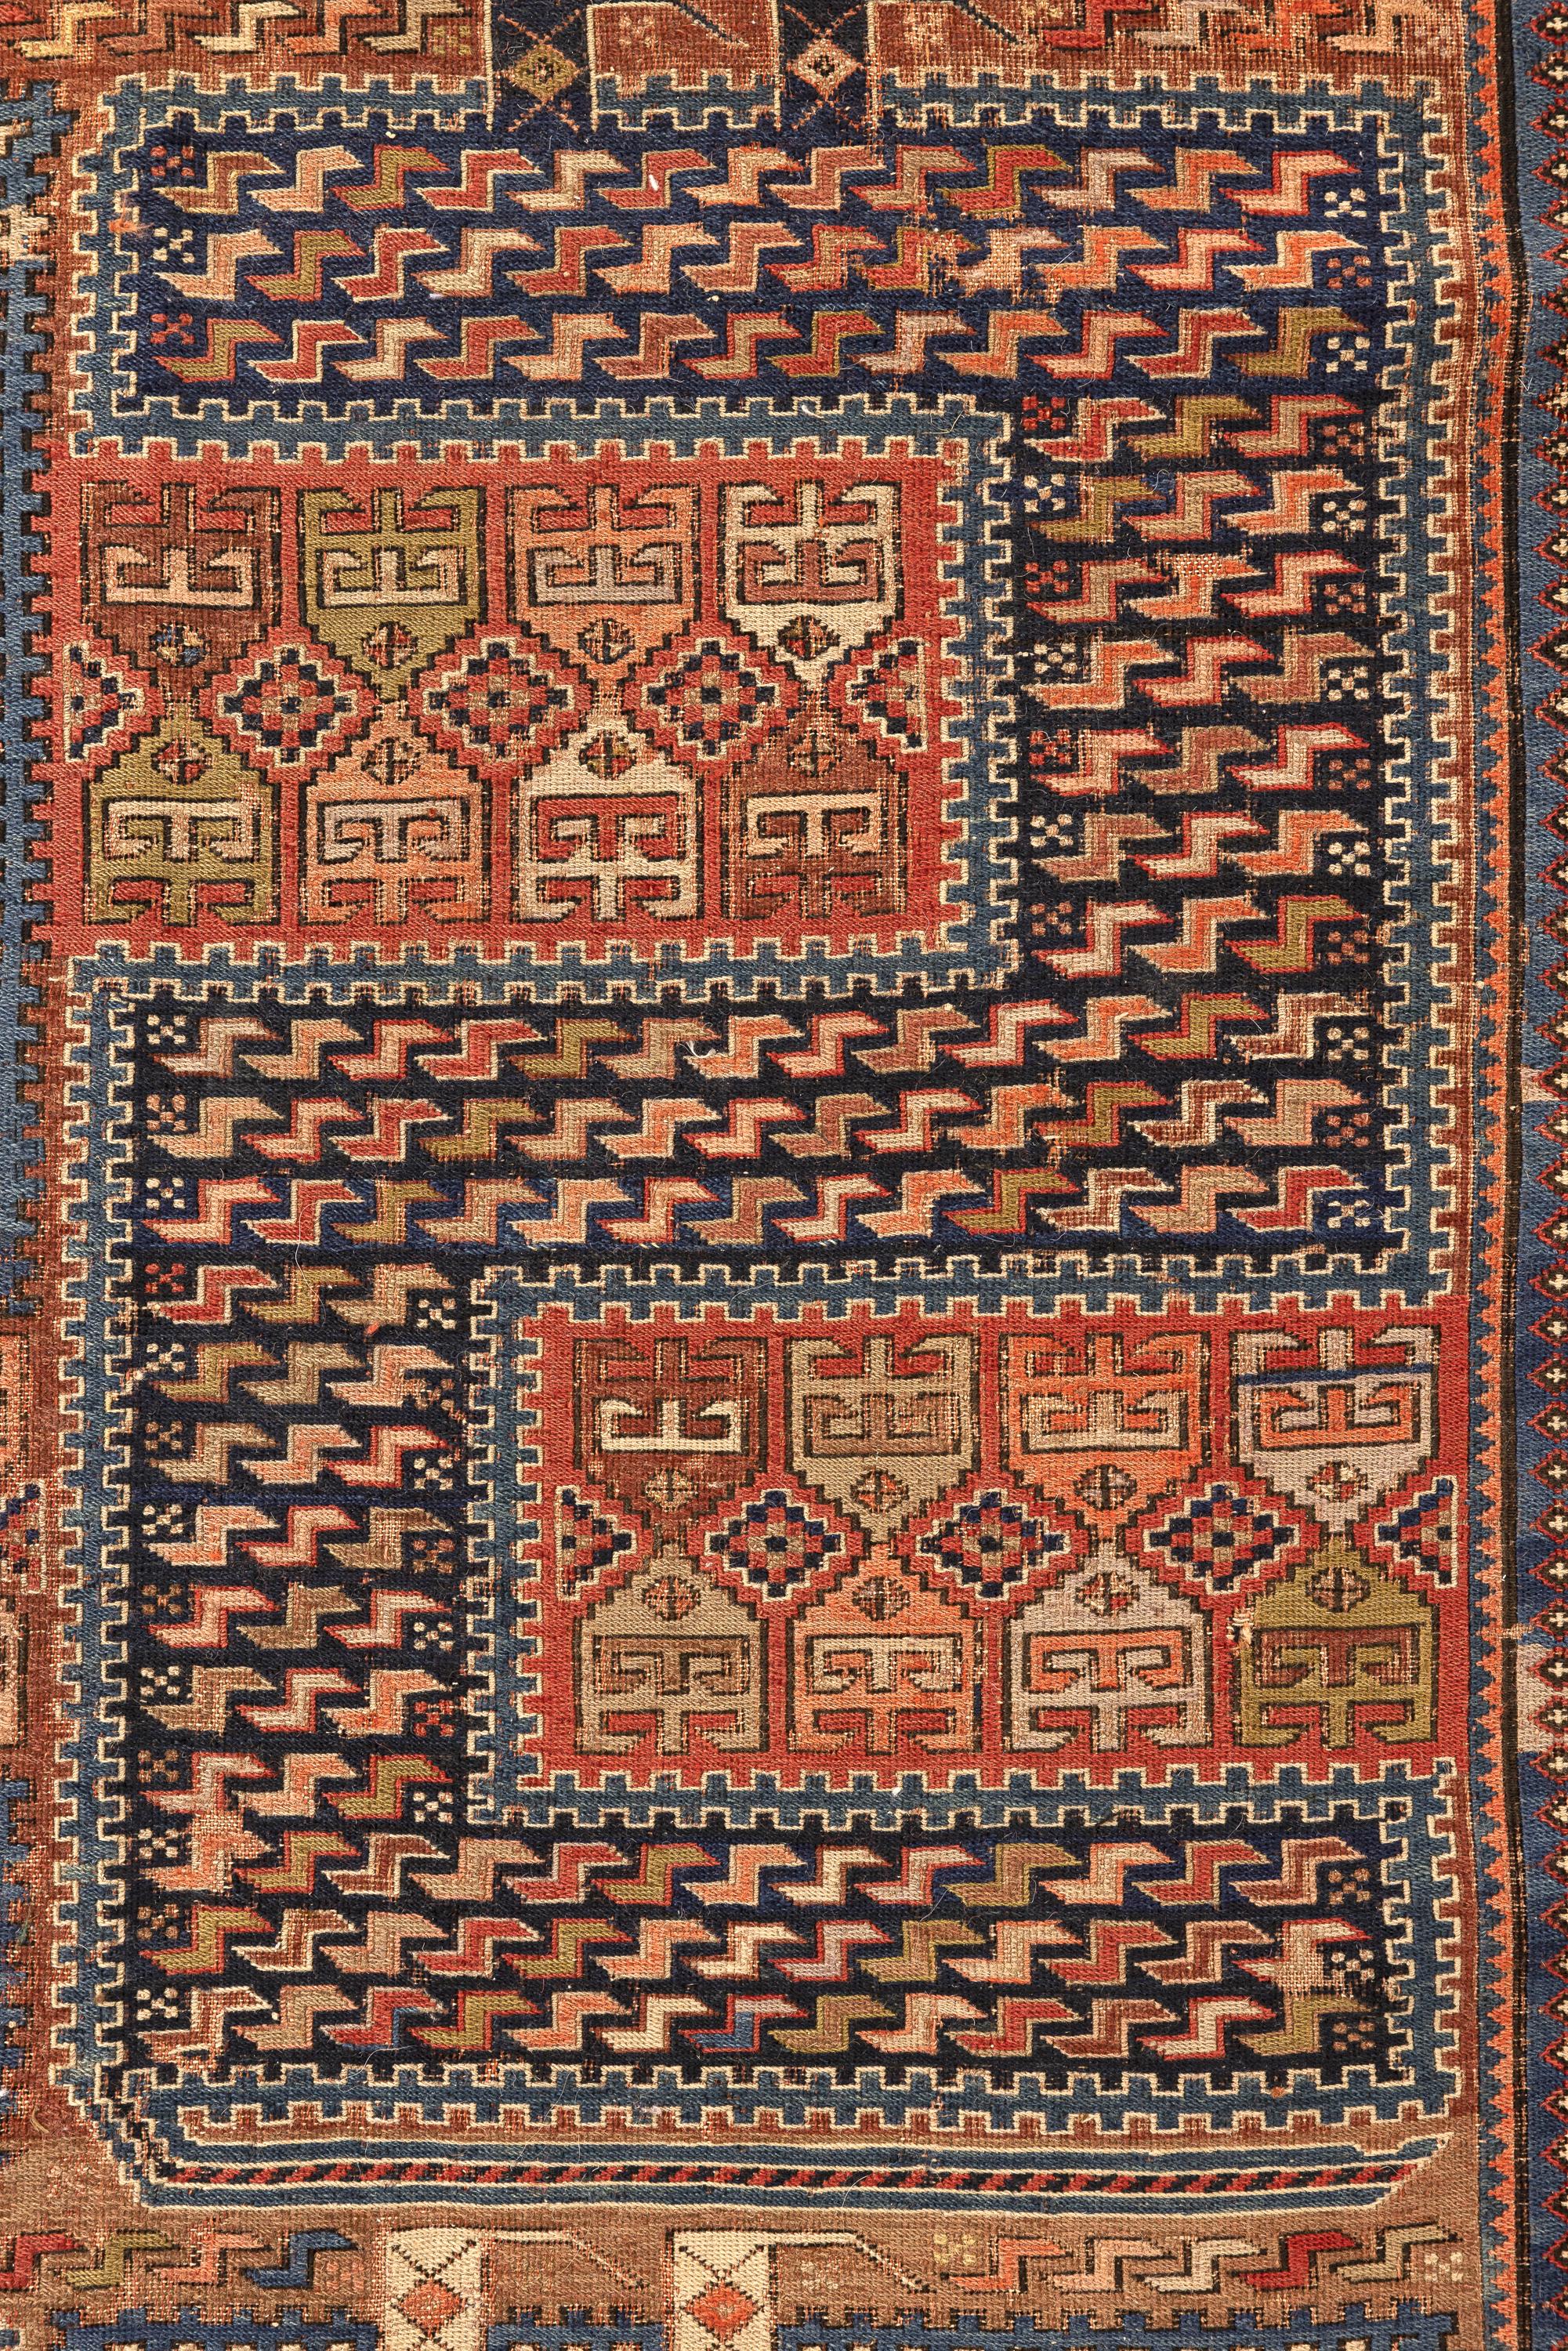 Sileh – Karabagh, South Caucasus

This splendid Sileh is of outstanding artistry and was woven with the best quality of the Soumaks. It is filled with tribal and animal motifs around four alternating columns in the shape of an S in reverse, in ivory